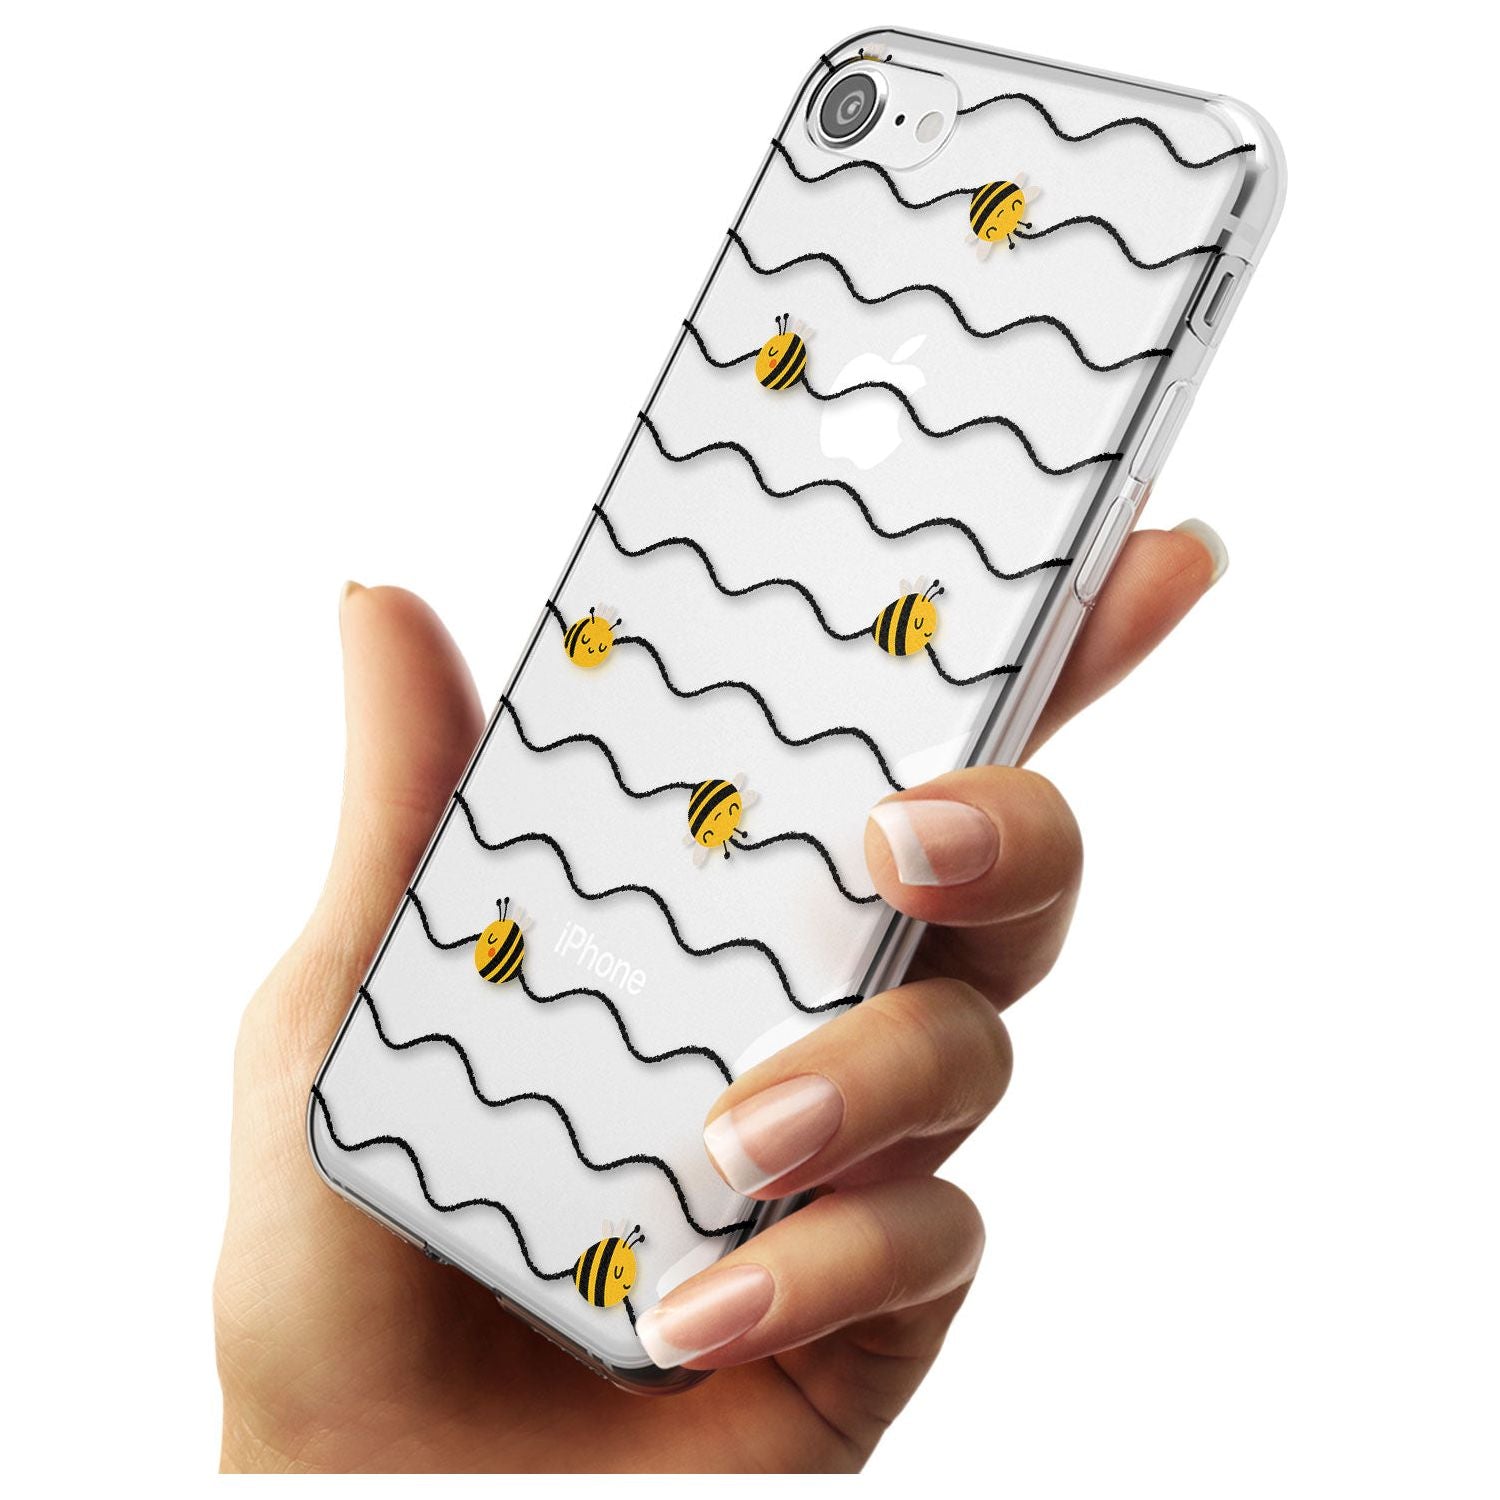 Sweet as Honey Patterns: Bees & Stripes (Clear) Slim TPU Phone Case for iPhone SE 8 7 Plus